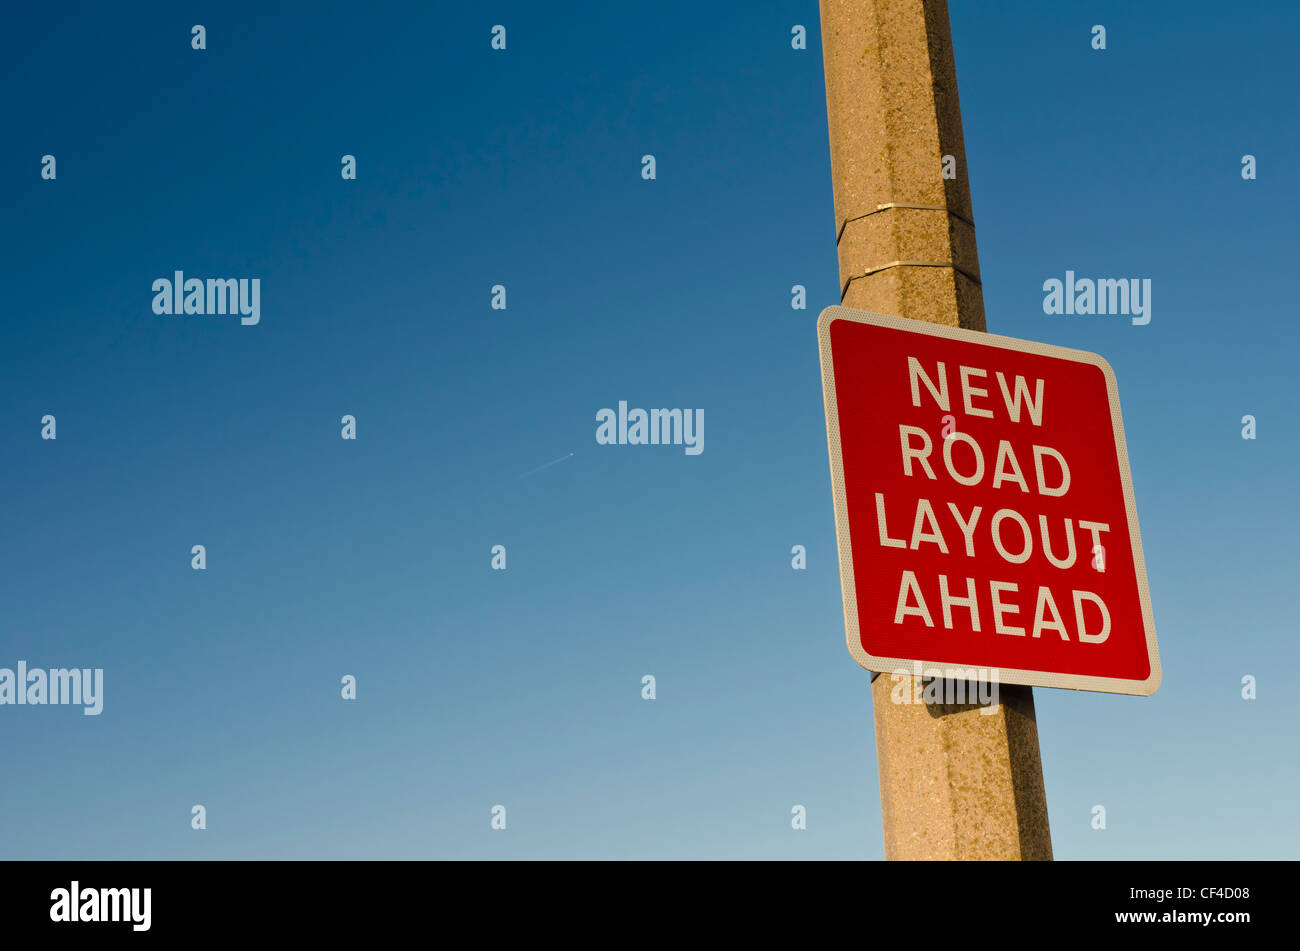 New road layout ahead on a concrete lamp post against a clear blue sky Stock Photo